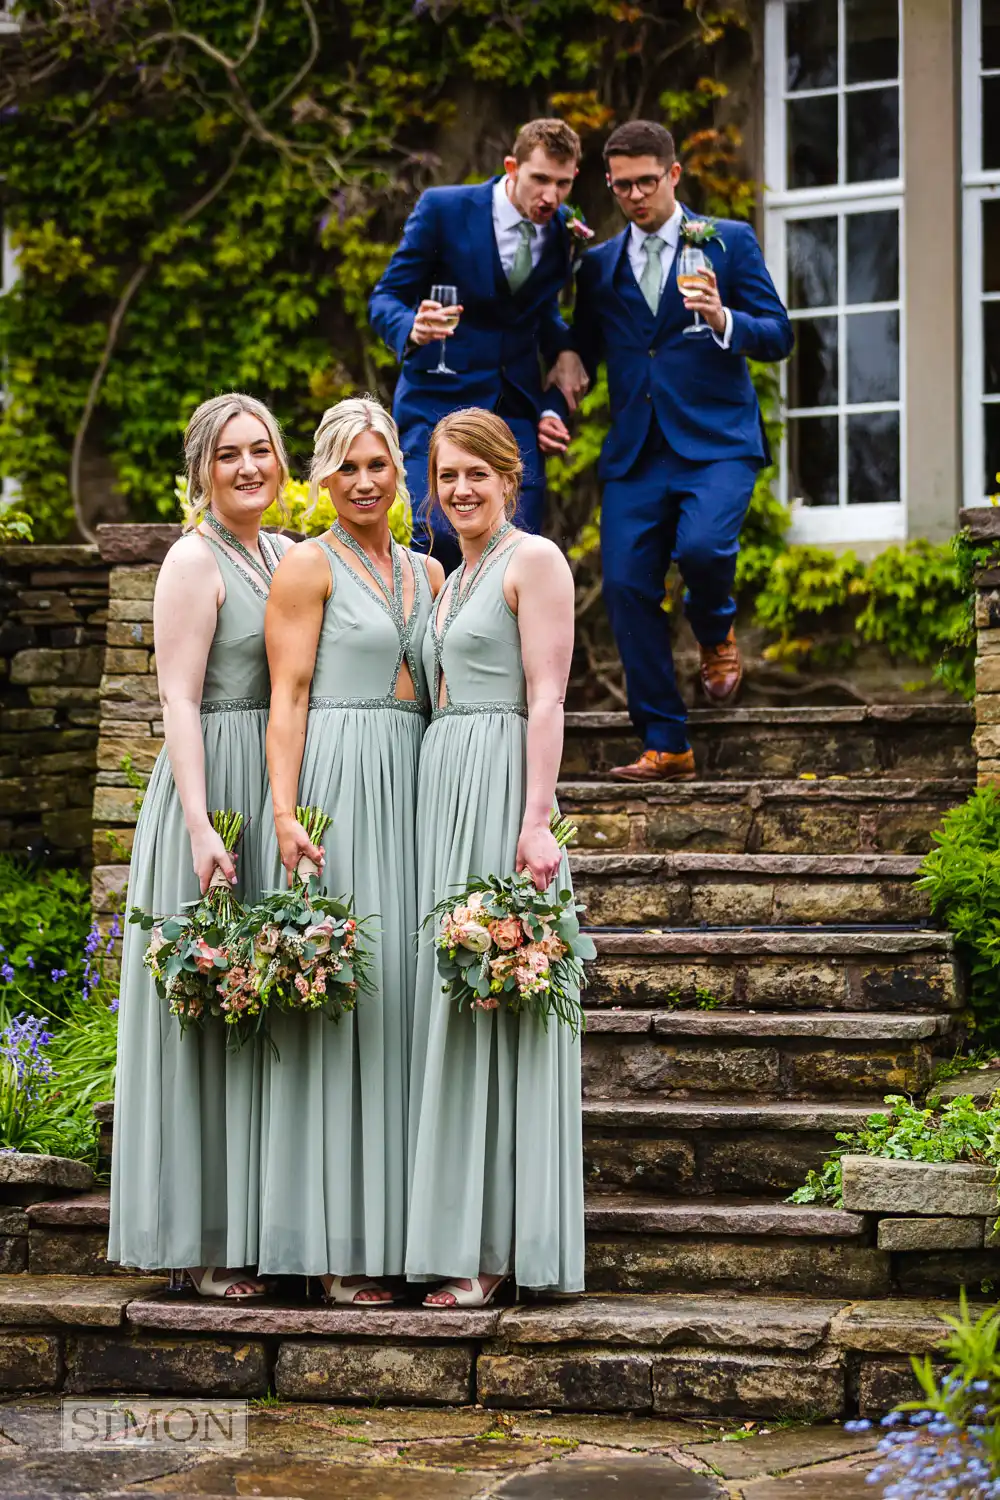 Hilltop Country House Wedding – Cheshire